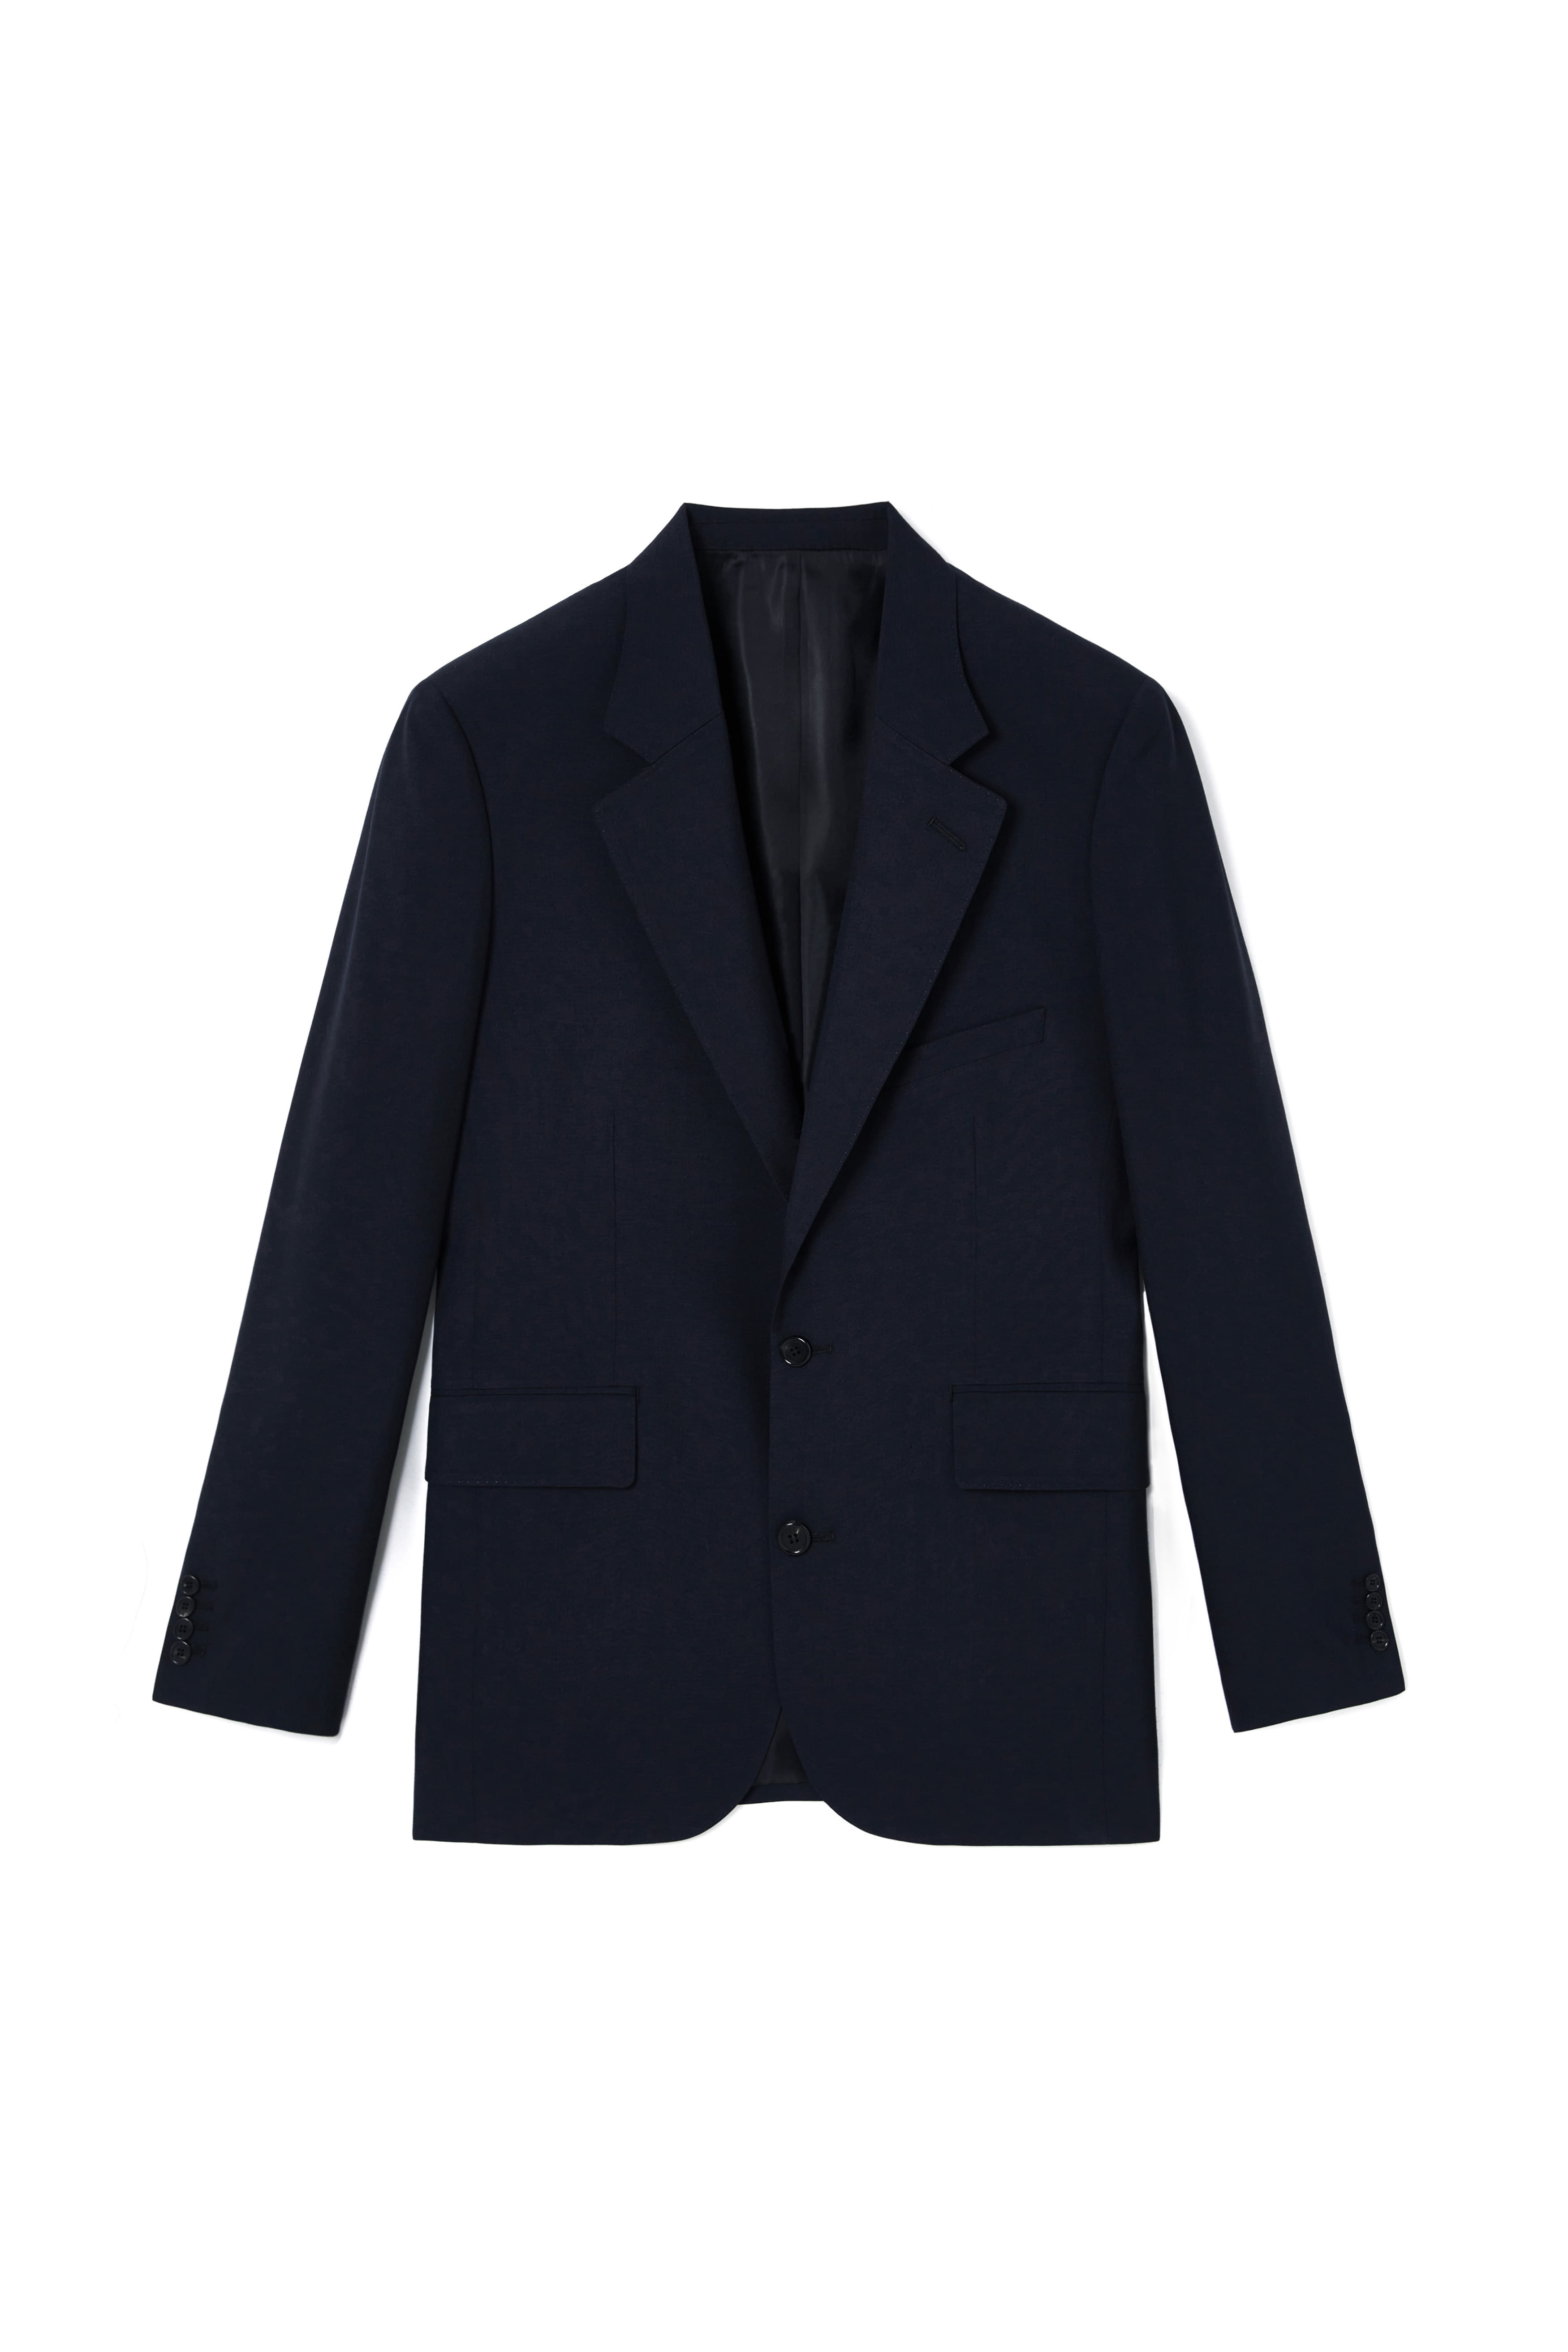 CLASSIC JACKET IN NAVY